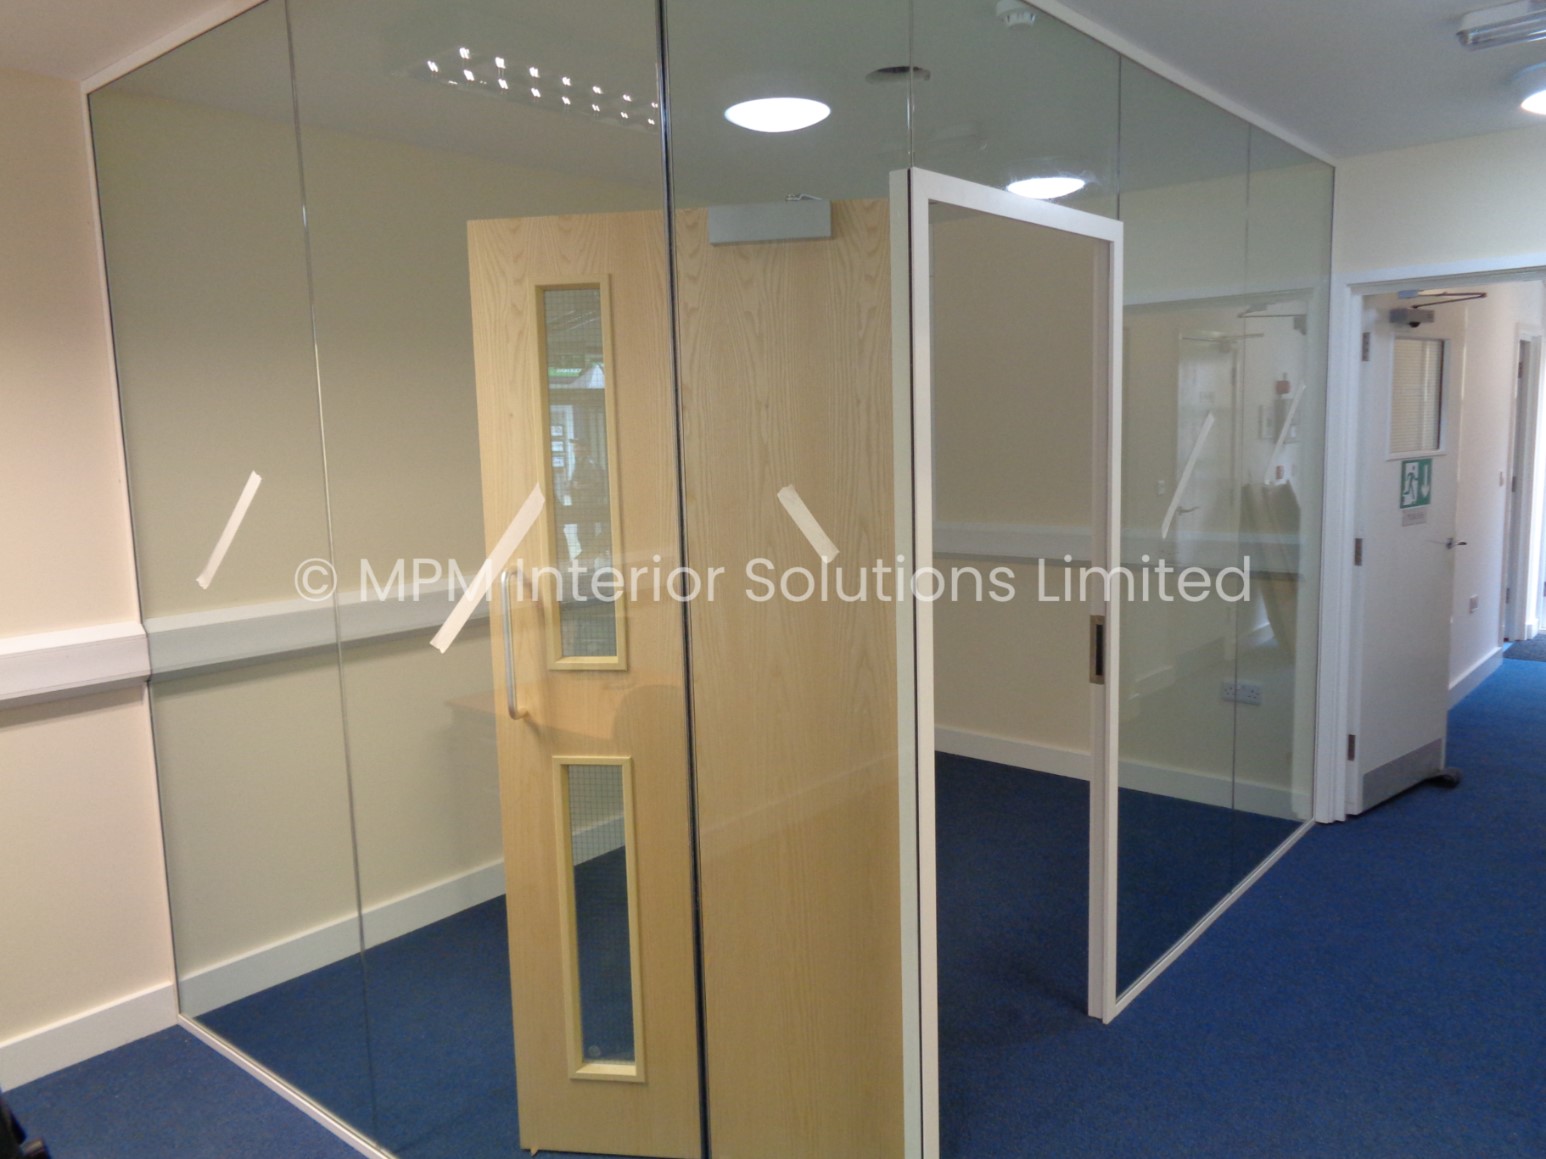 Frameless Glass Office Partitioning, FPR Group / First People Recruitment Ltd (Bognor Regis, West Sussex), MPM Interior Solutions Limited